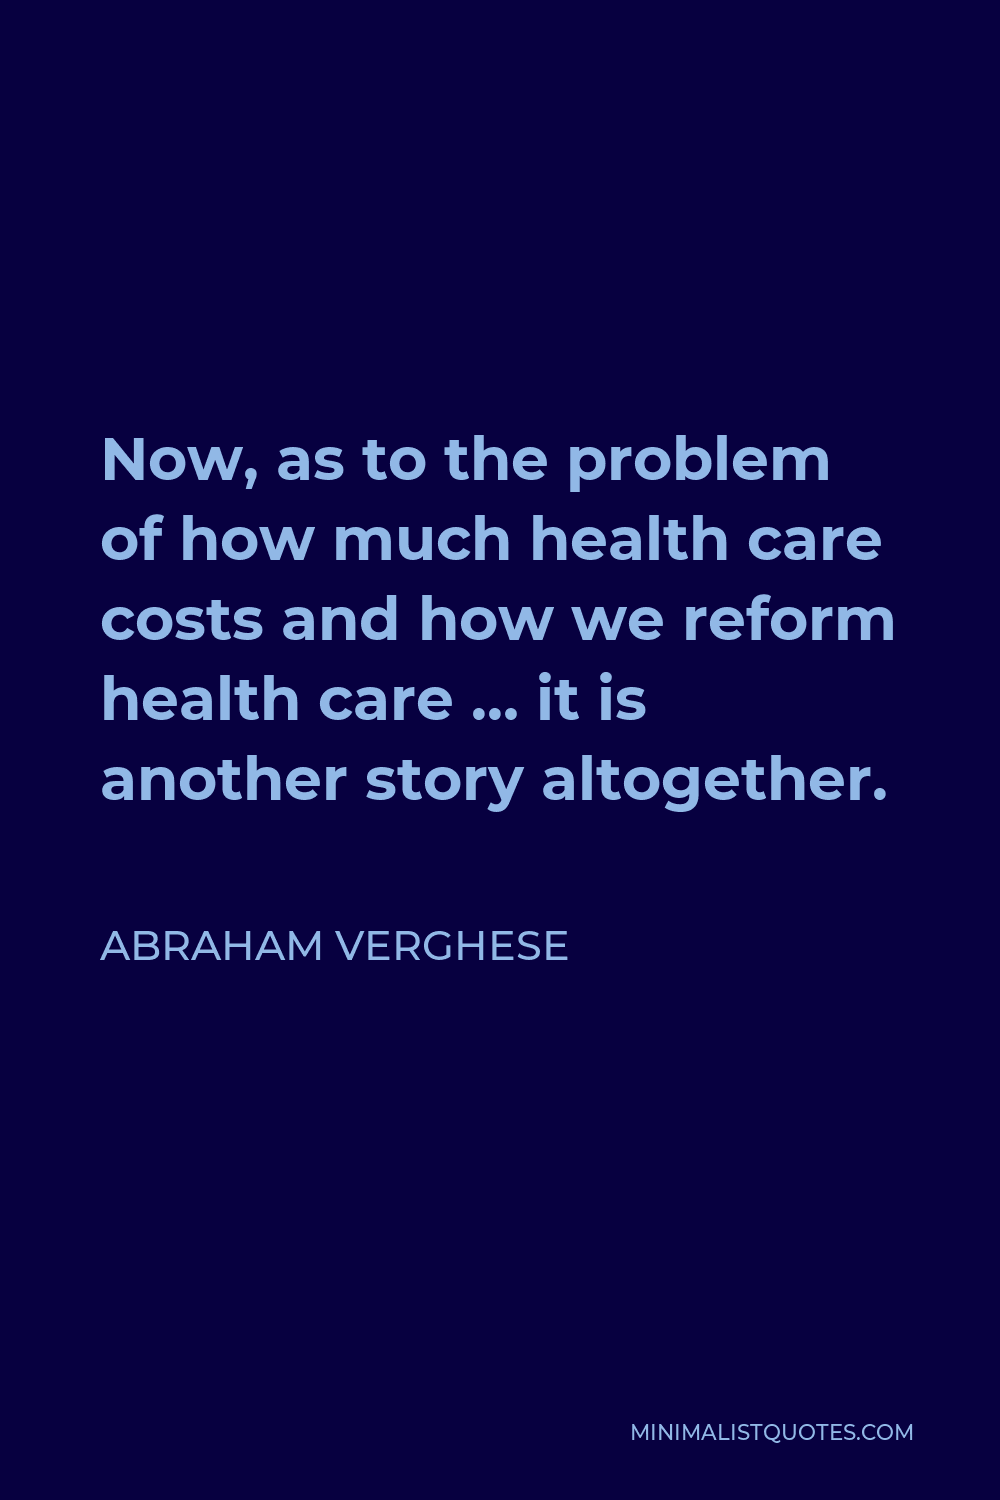 Abraham Verghese Quote - Now, as to the problem of how much health care costs and how we reform health care … it is another story altogether.